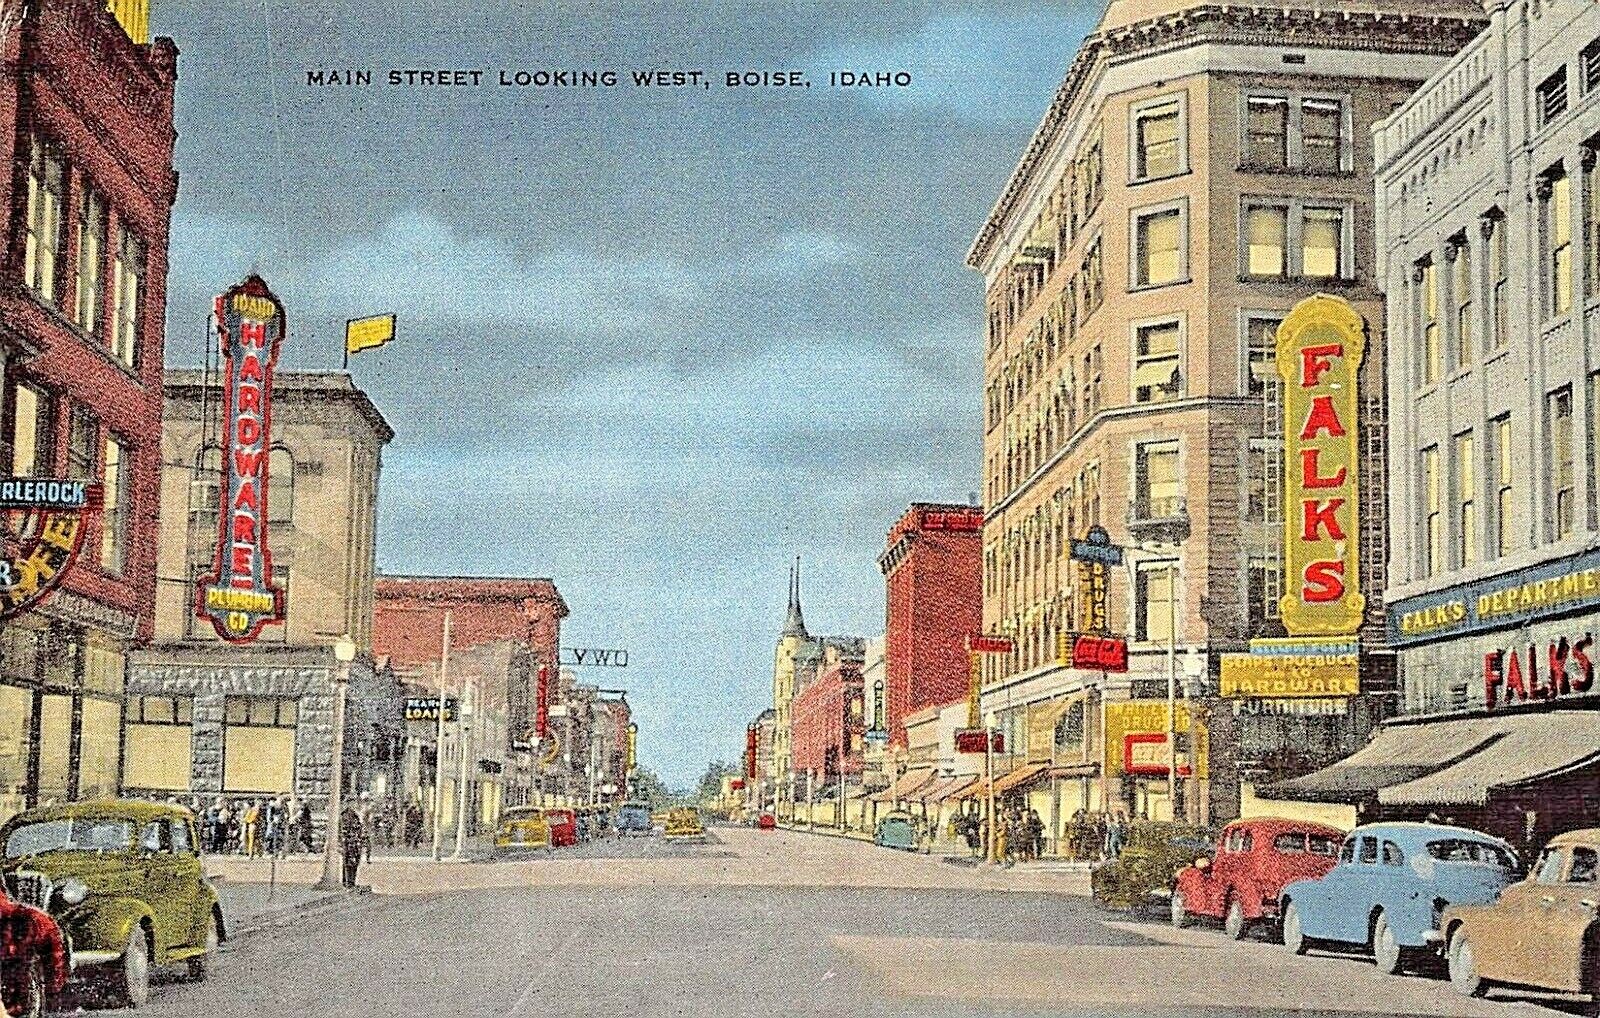 Boise Idaho~main Street Looking West-storefronts-signs-cars-coca~1940s Postcard